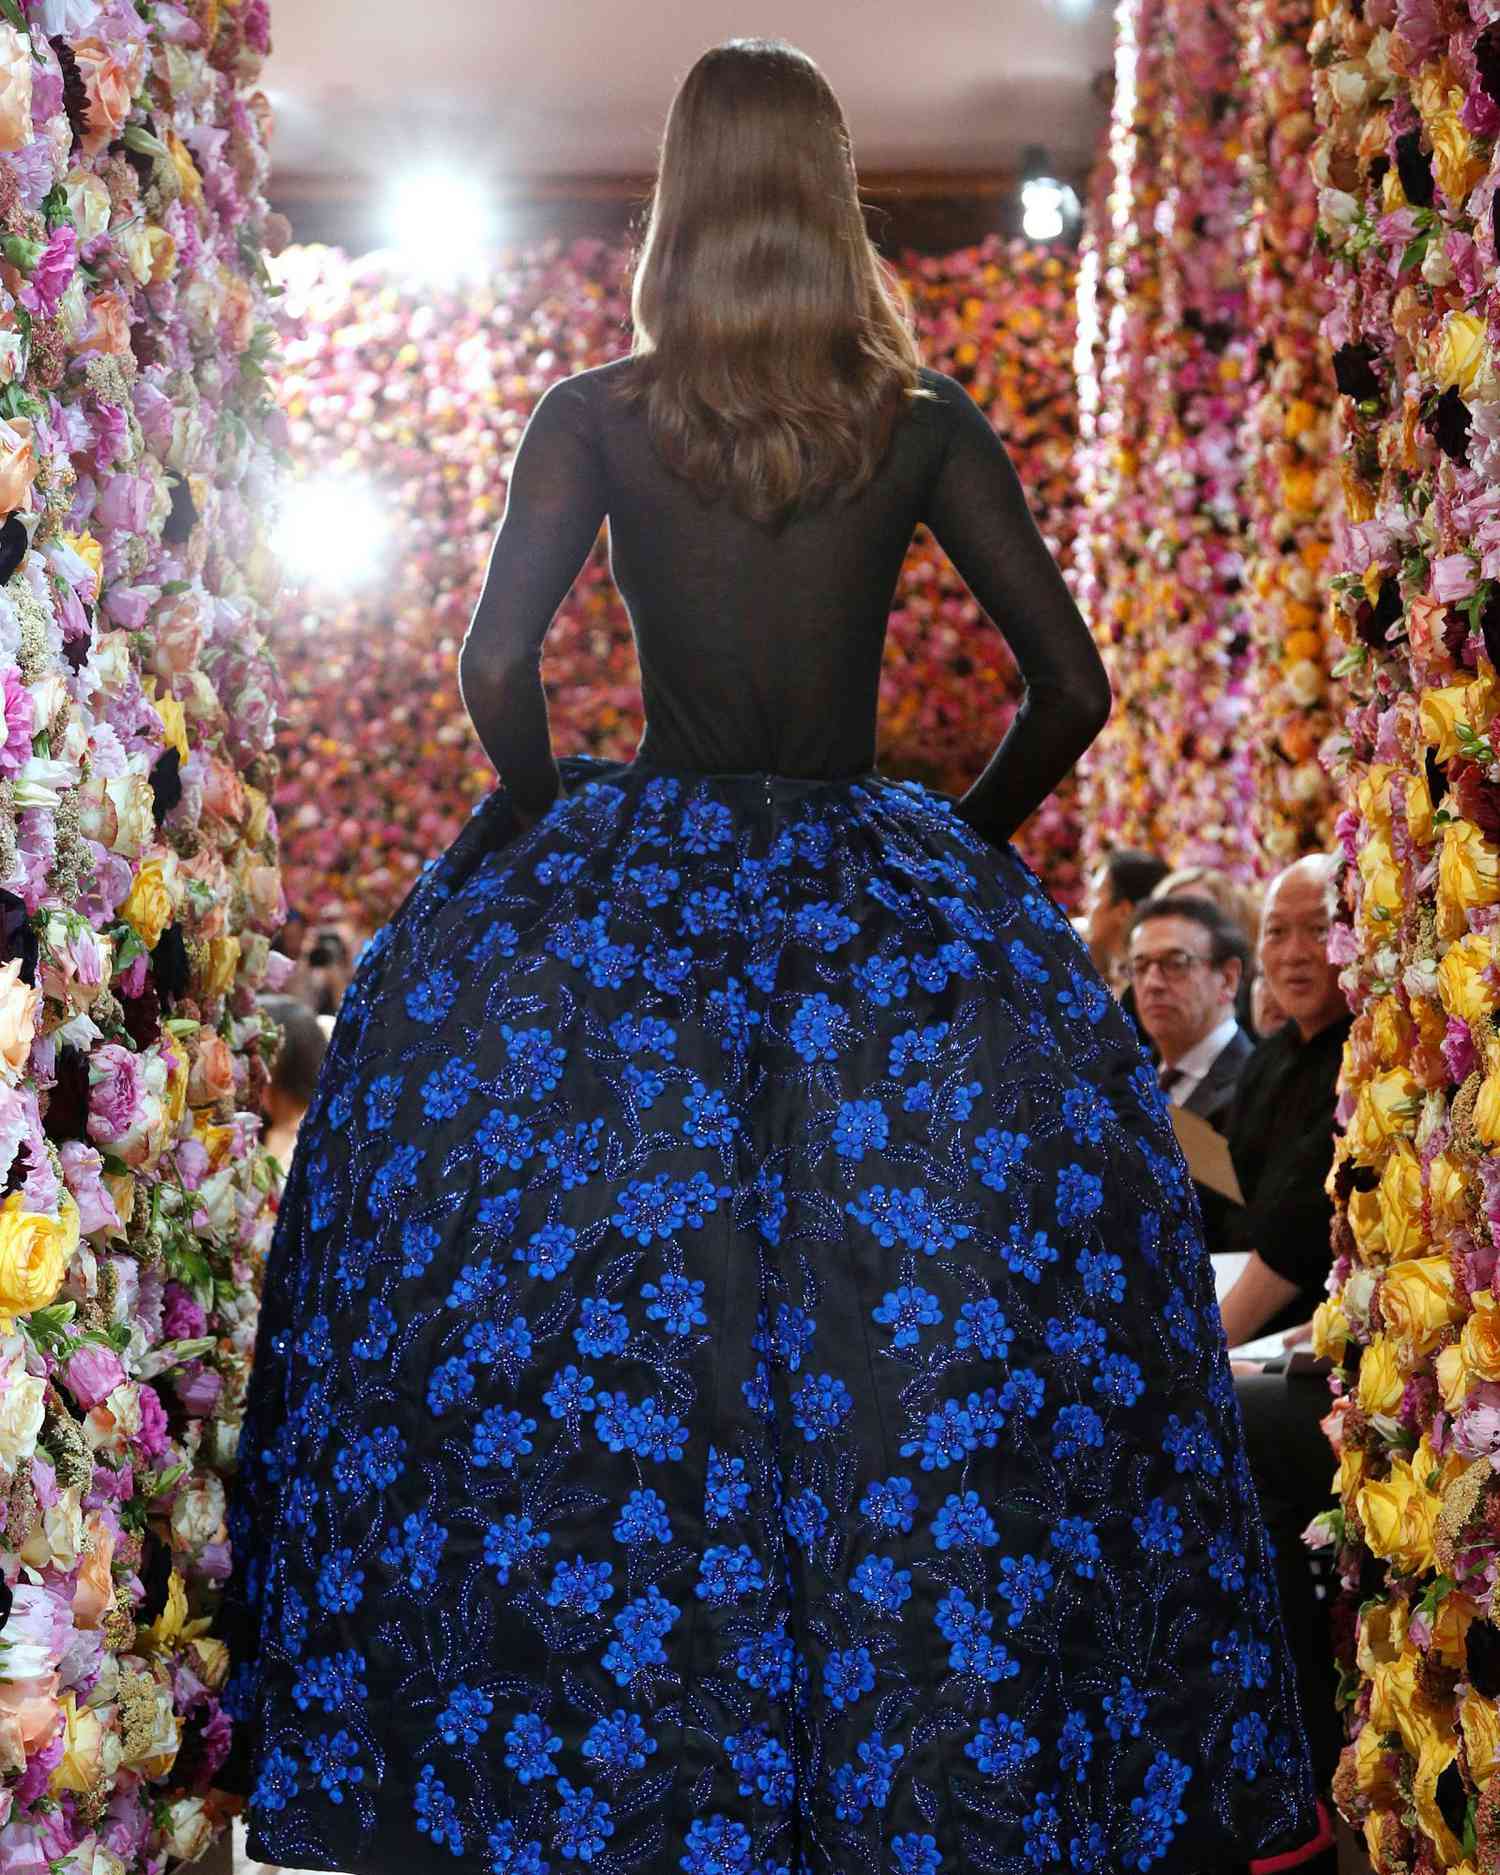 Dior's Haute Couture Blooms